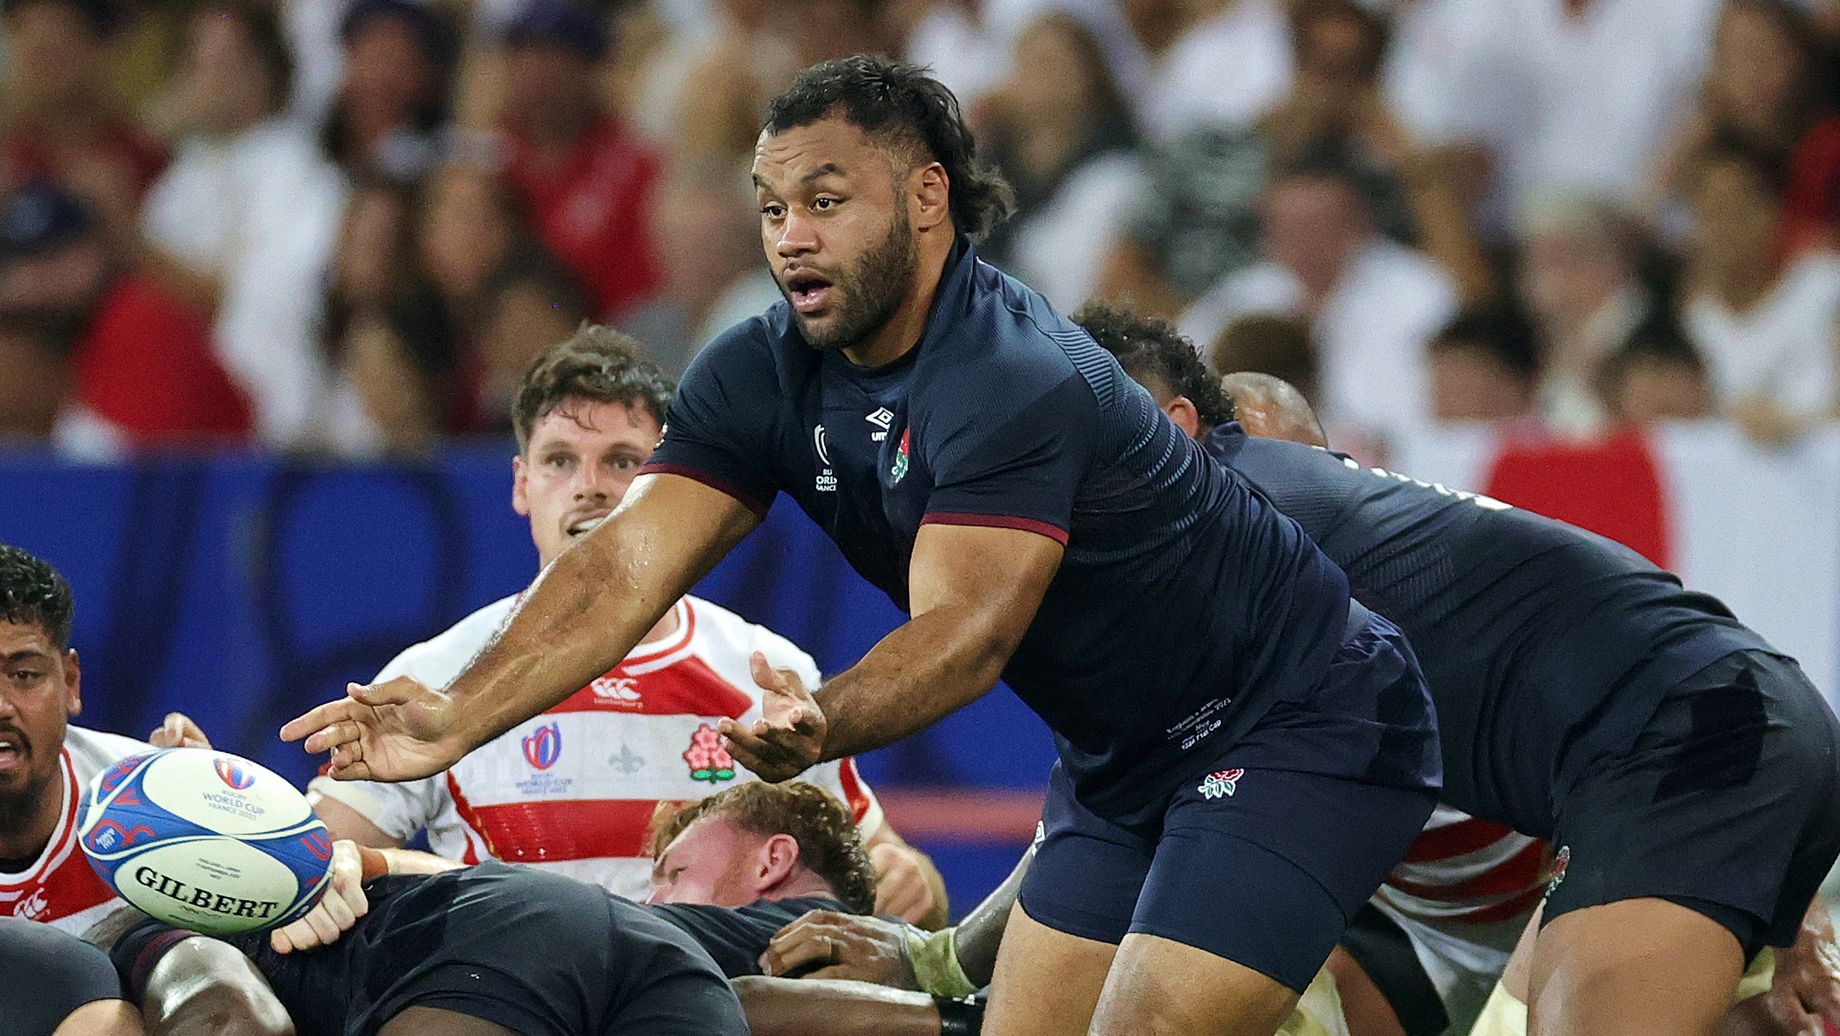 Billy Vunipola passes the ball during the Rugby World Cup match between England and Japan.